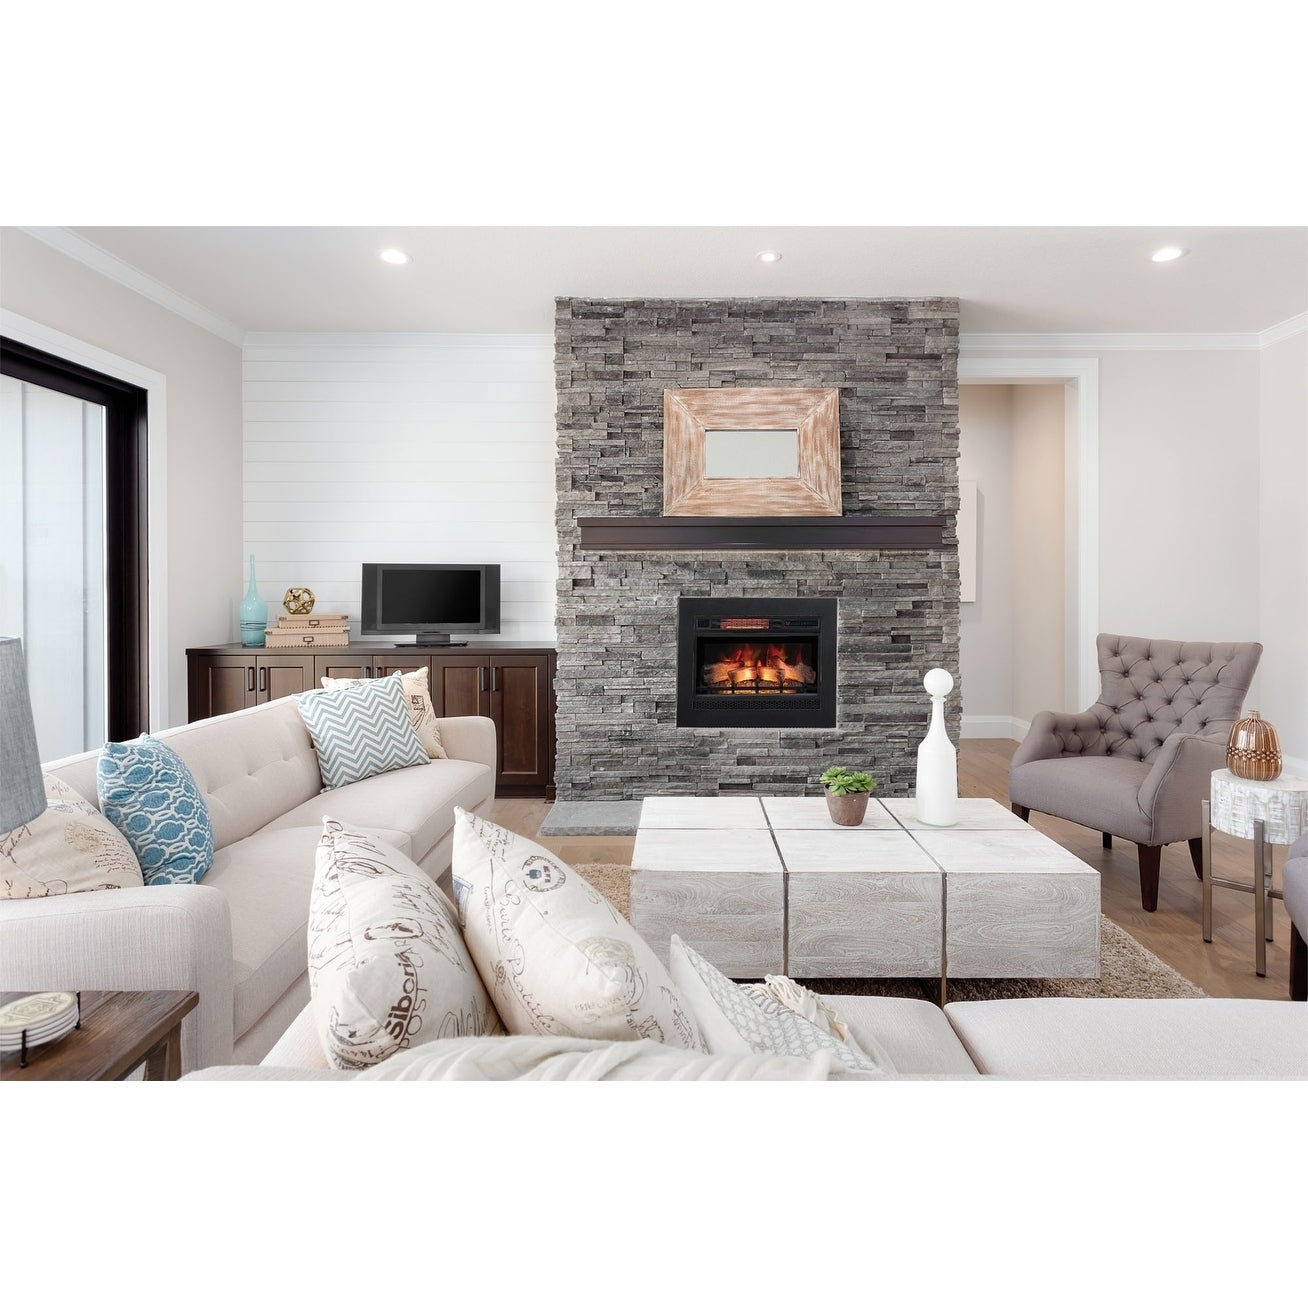 Adding A Fireplace to A Home Awesome Classicflame 26" 3d Infrared Quartz Electric Fireplace Insert